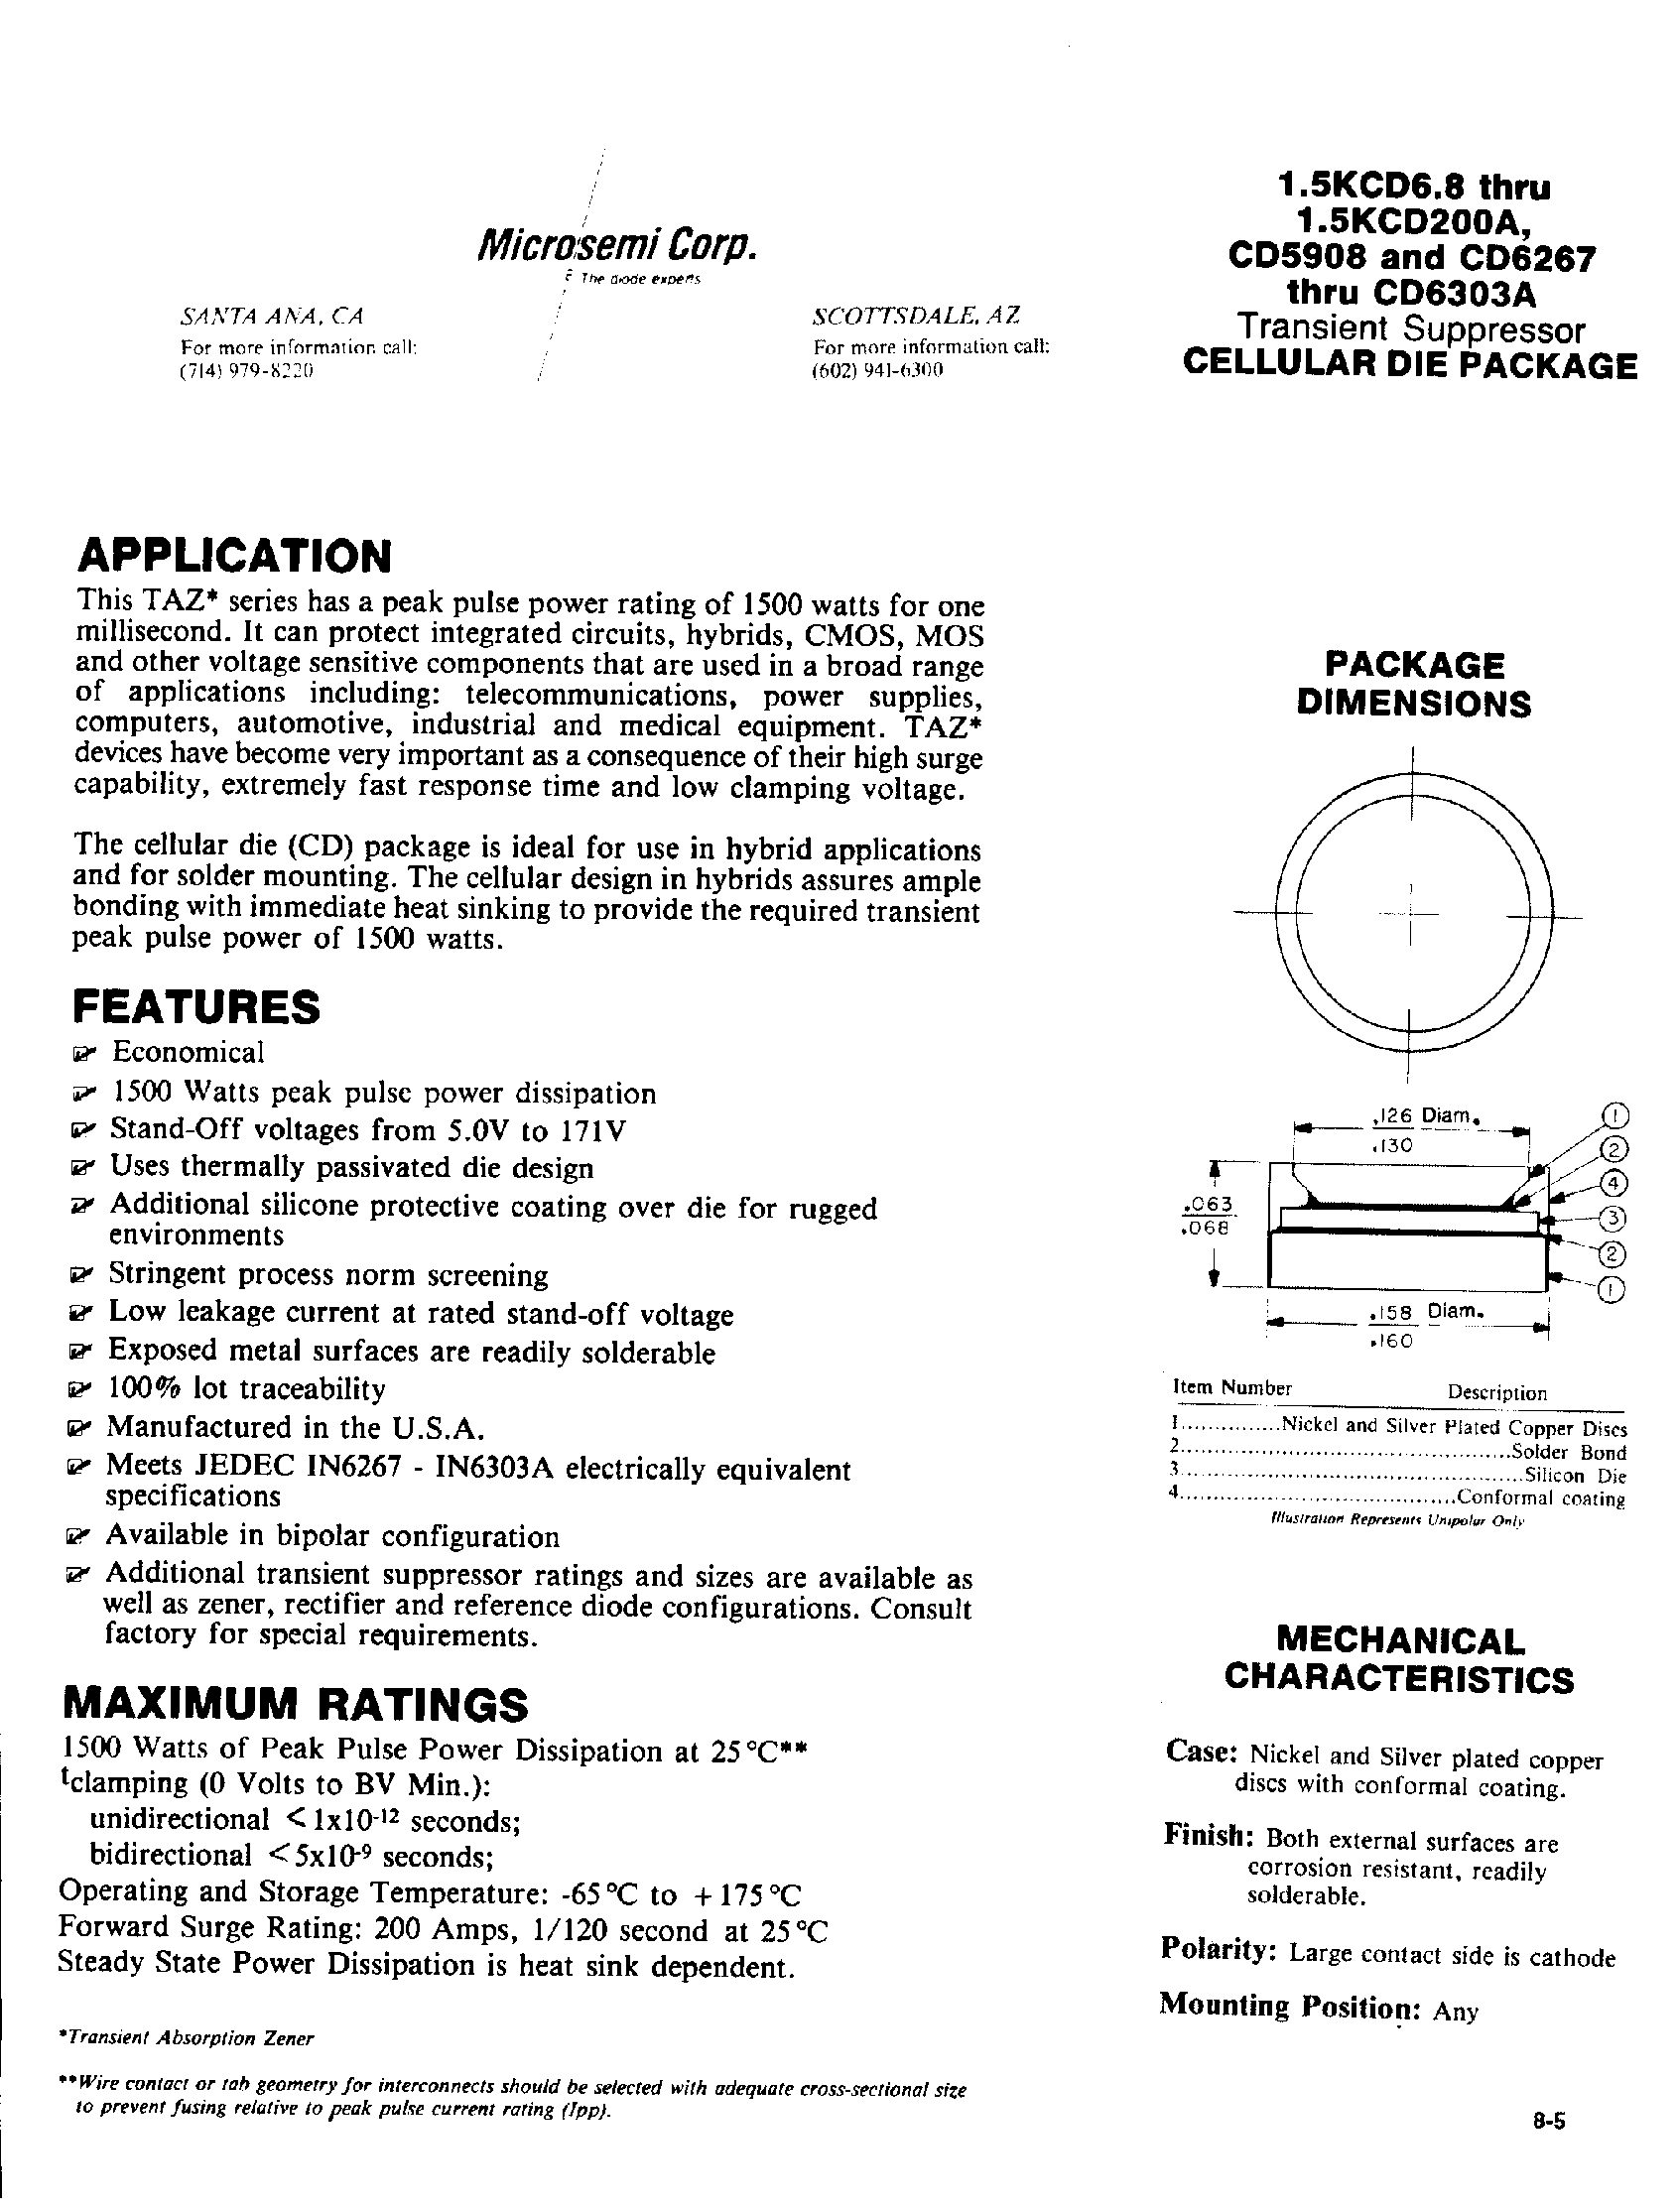 Datasheet CD6278A - Transient suppressor CELLULAR DIE PACKAGE page 1